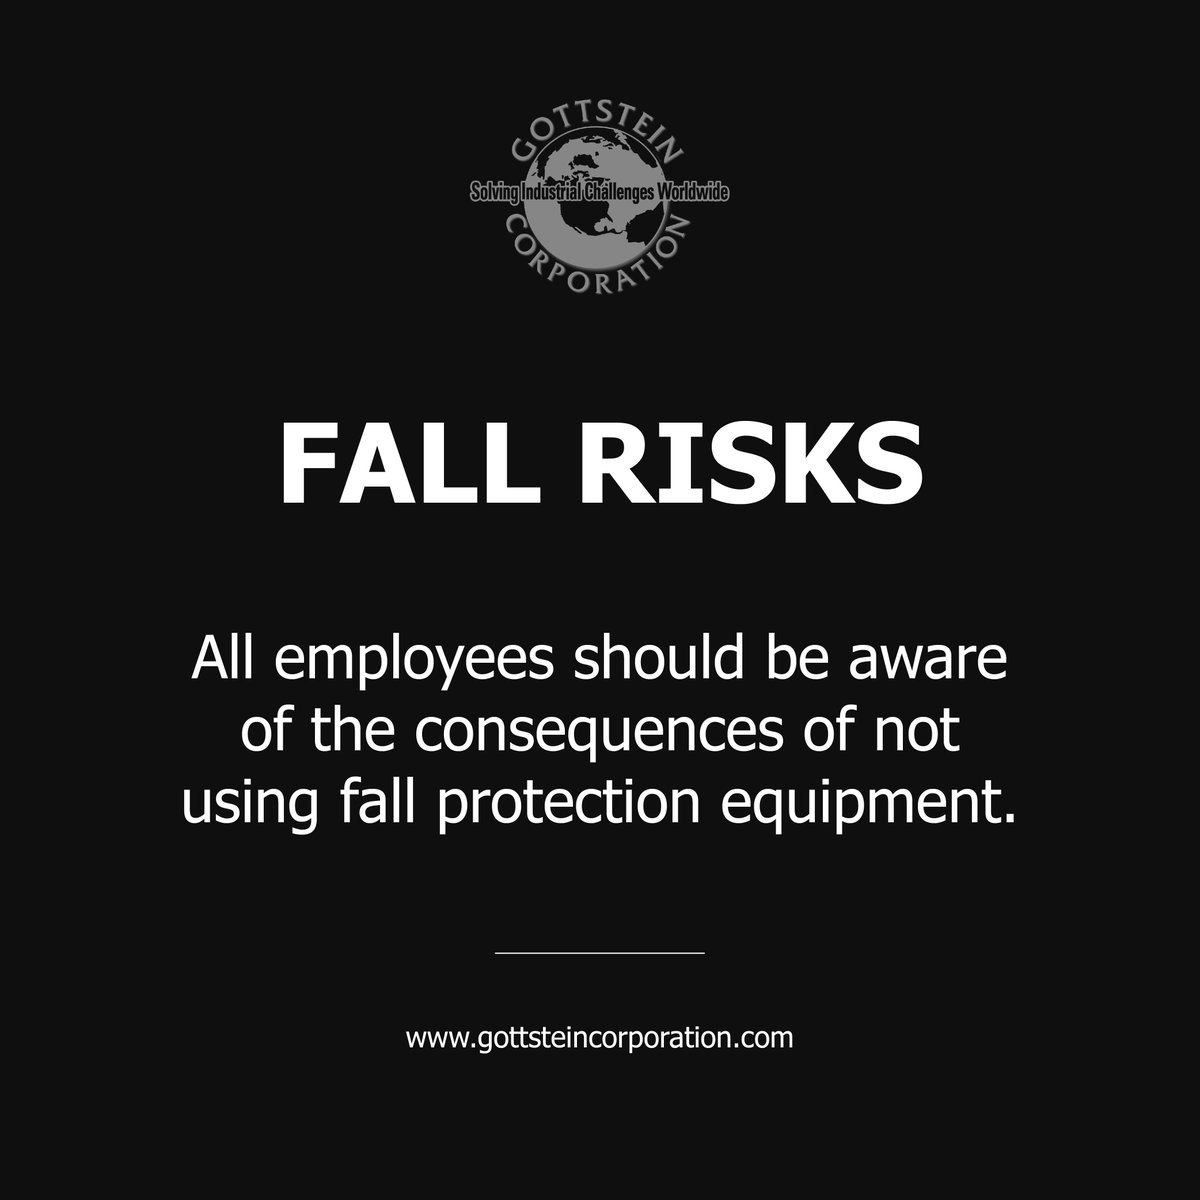 Fall risks
We can help you ⭐
Contact us: +1 570-454-7162
e-mail: info@gottsteincorporation.com
gottsteincorporation.com/how-to-protect…
#industrypennsylvania #gottsteincorporation 
#industrialengineering